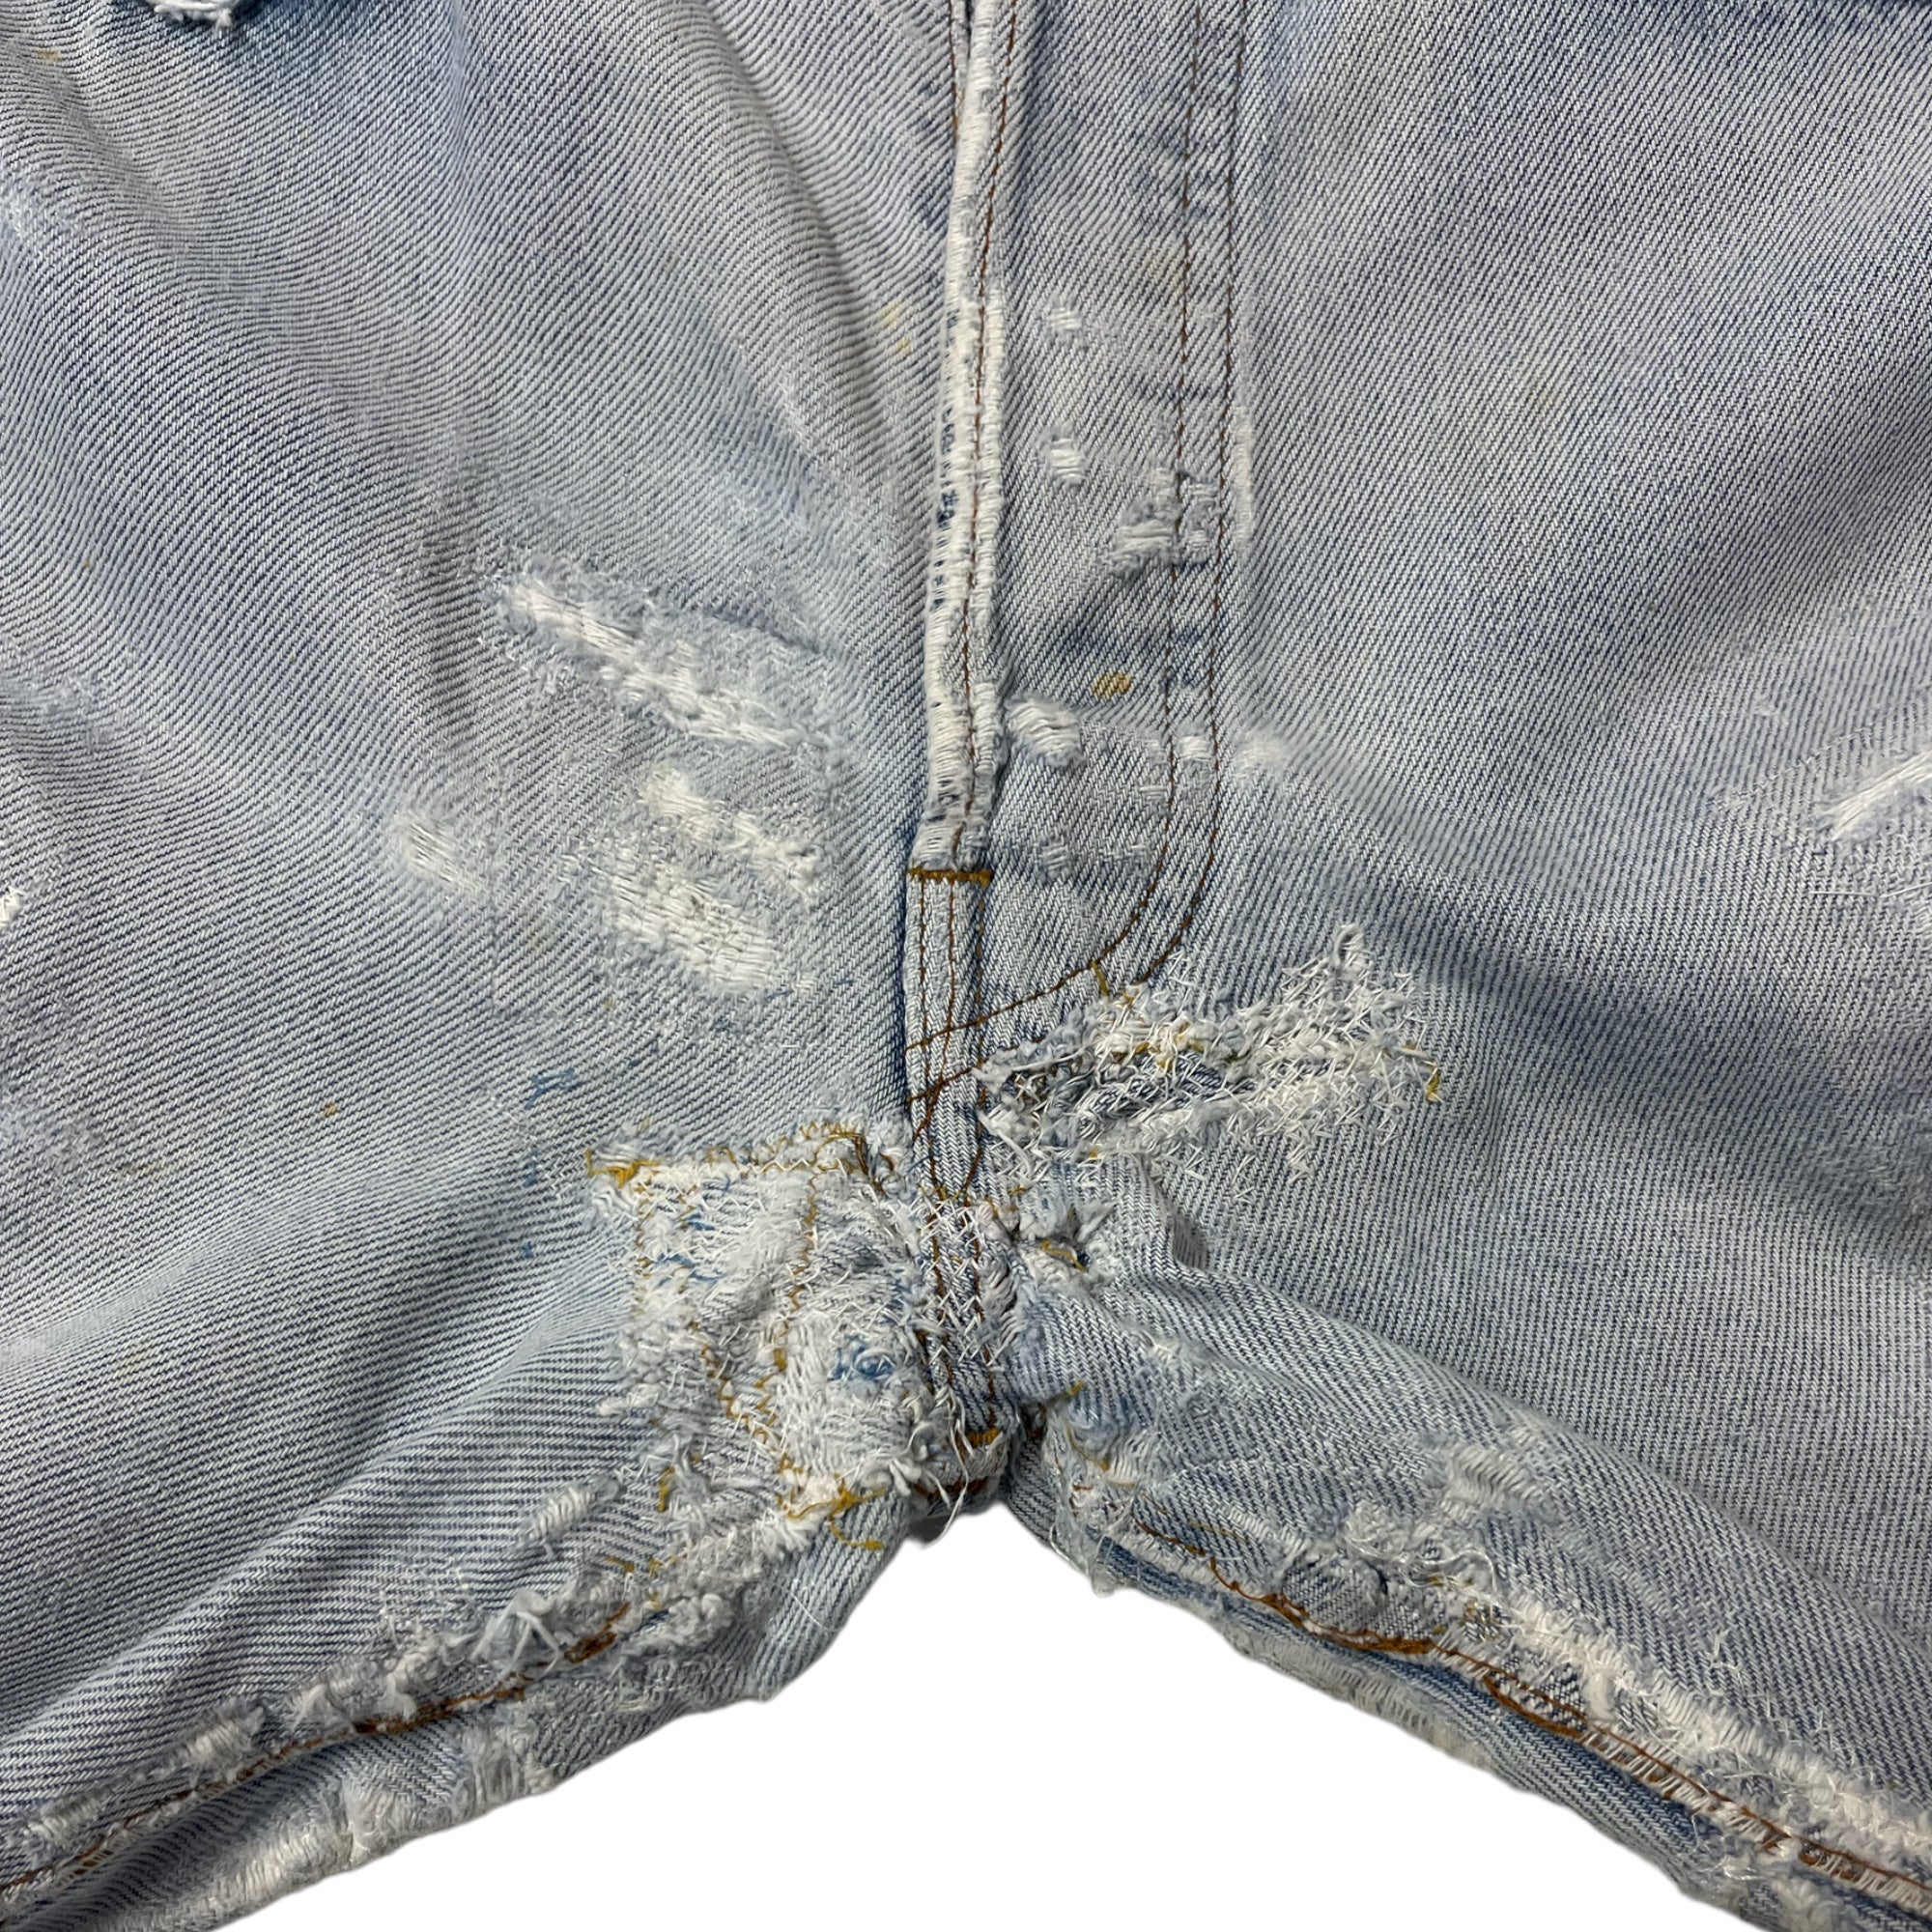 Early 80s Levi’s Redline Selvedge 501 Denim Jeans with Extensive Repairs -  Lightwash Blue - 31x31